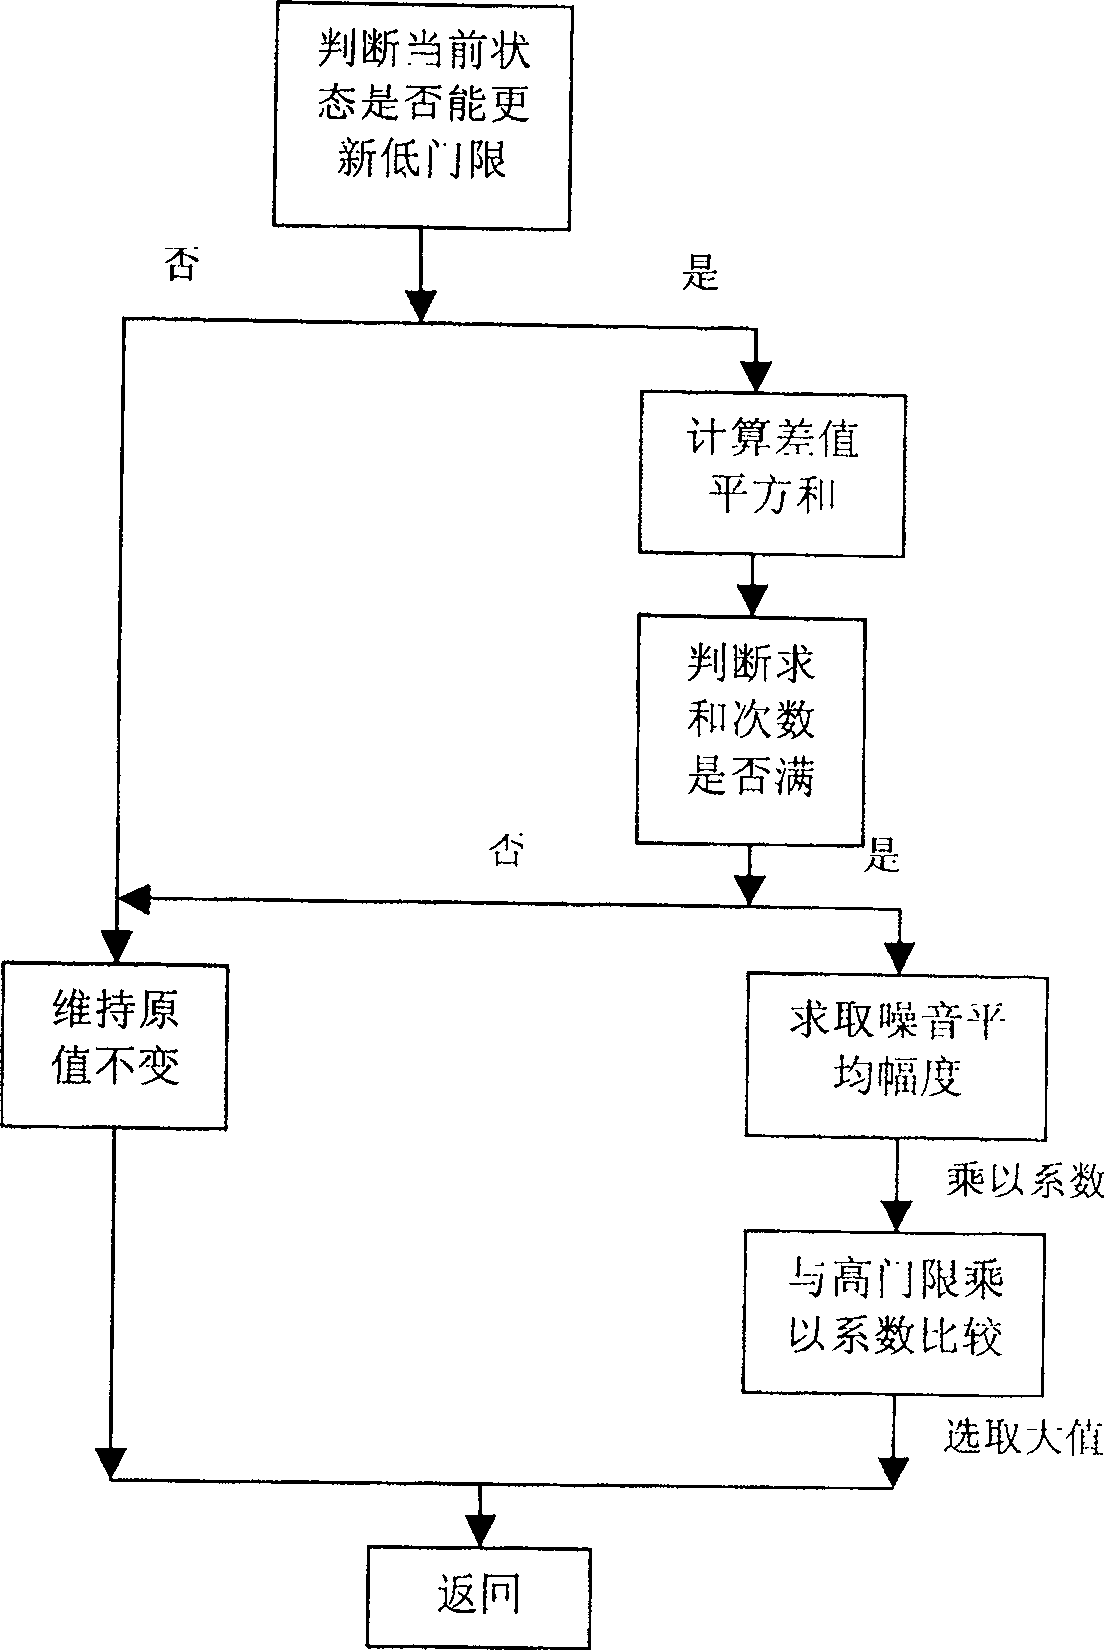 Self-adaptive judging method for capacitor type push-button